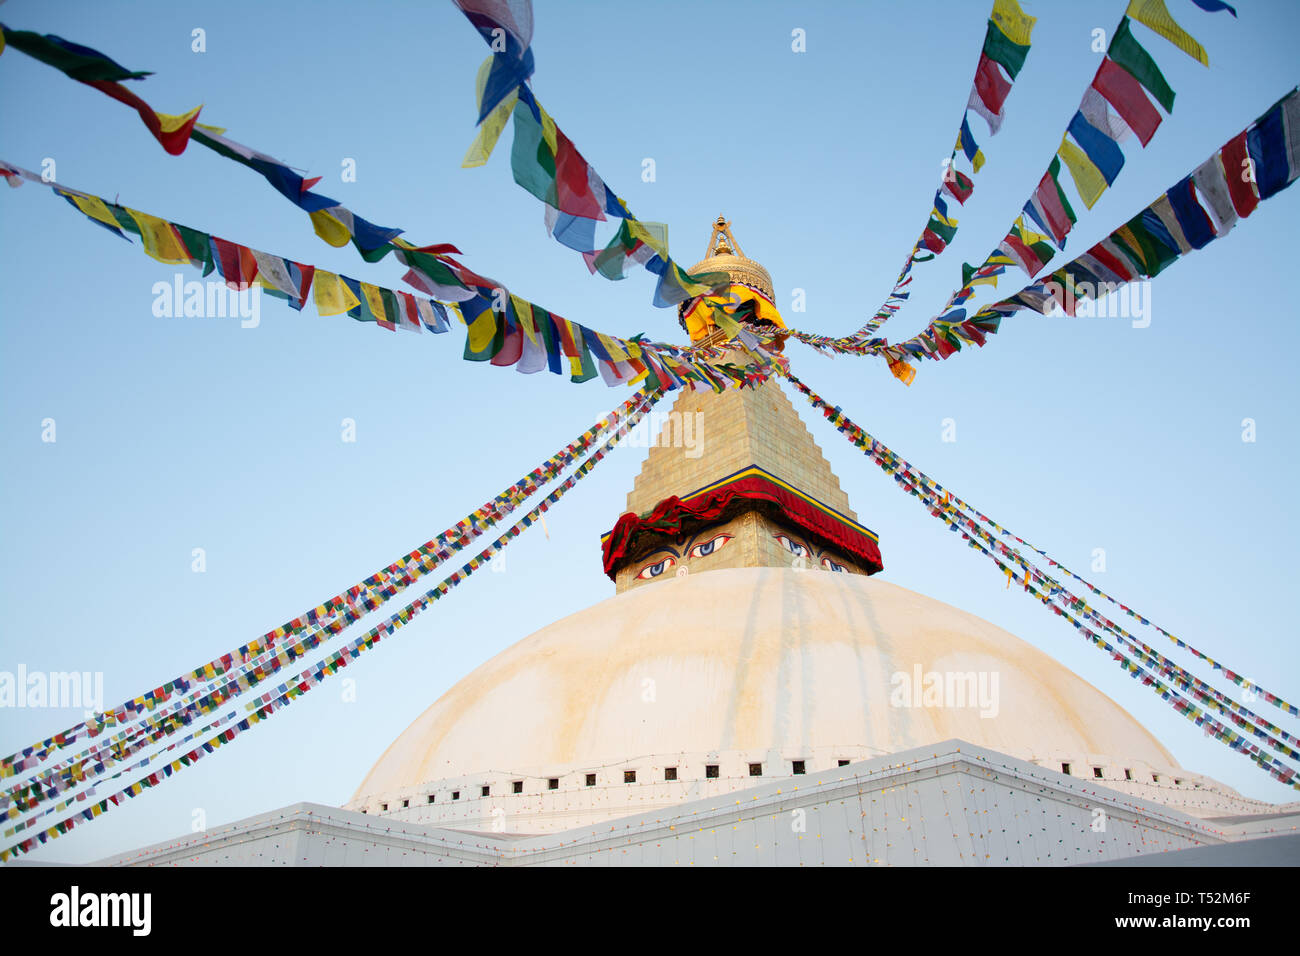 Kathmandu, Nepal - December 03, 2016: Bouddha stupa decorated with colourful prayer flags in Kathmandu. It is one of the largest stupas in the world. Stock Photo